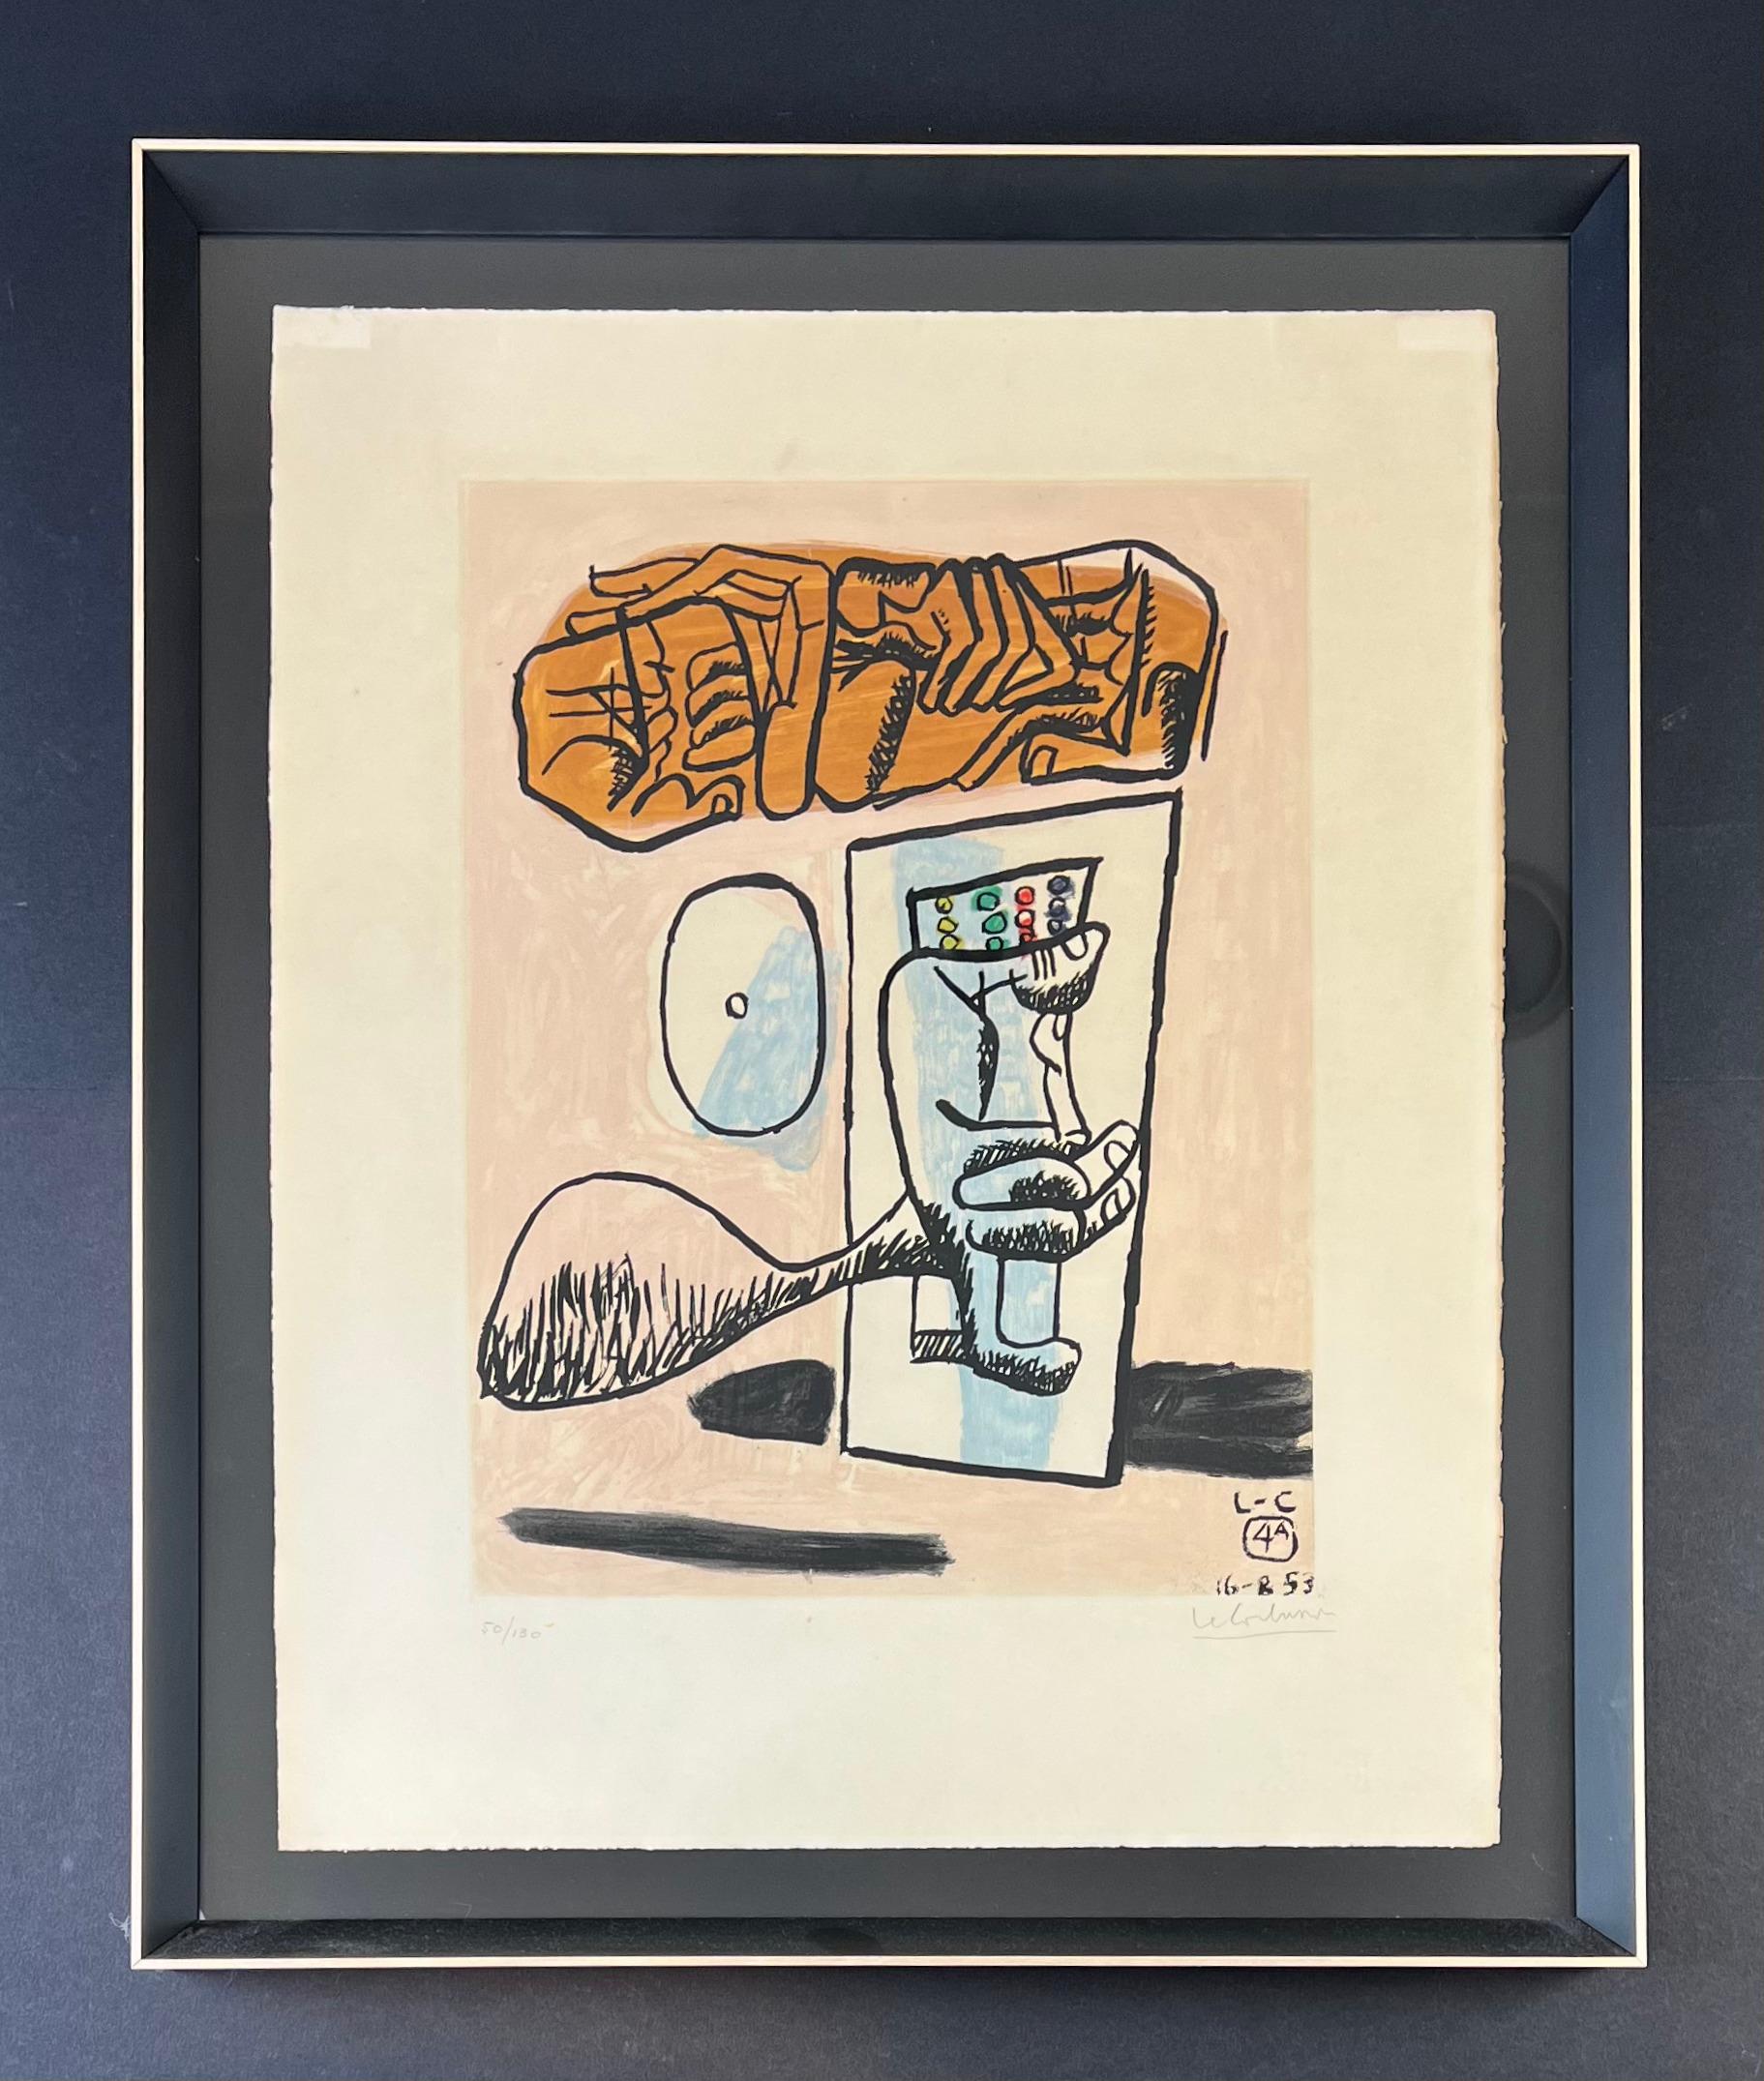 etching and aquatint on Rives paper, edited in 1965
Limited Edition of 130 copies plus 30 in roman numbers
Hand signed in pencil by artist lower right
and numbered 50/130 lower left
Paper size: 57 x 45,2 cm
Framed size: 66 x 54,5 x 5 cm

Printed by